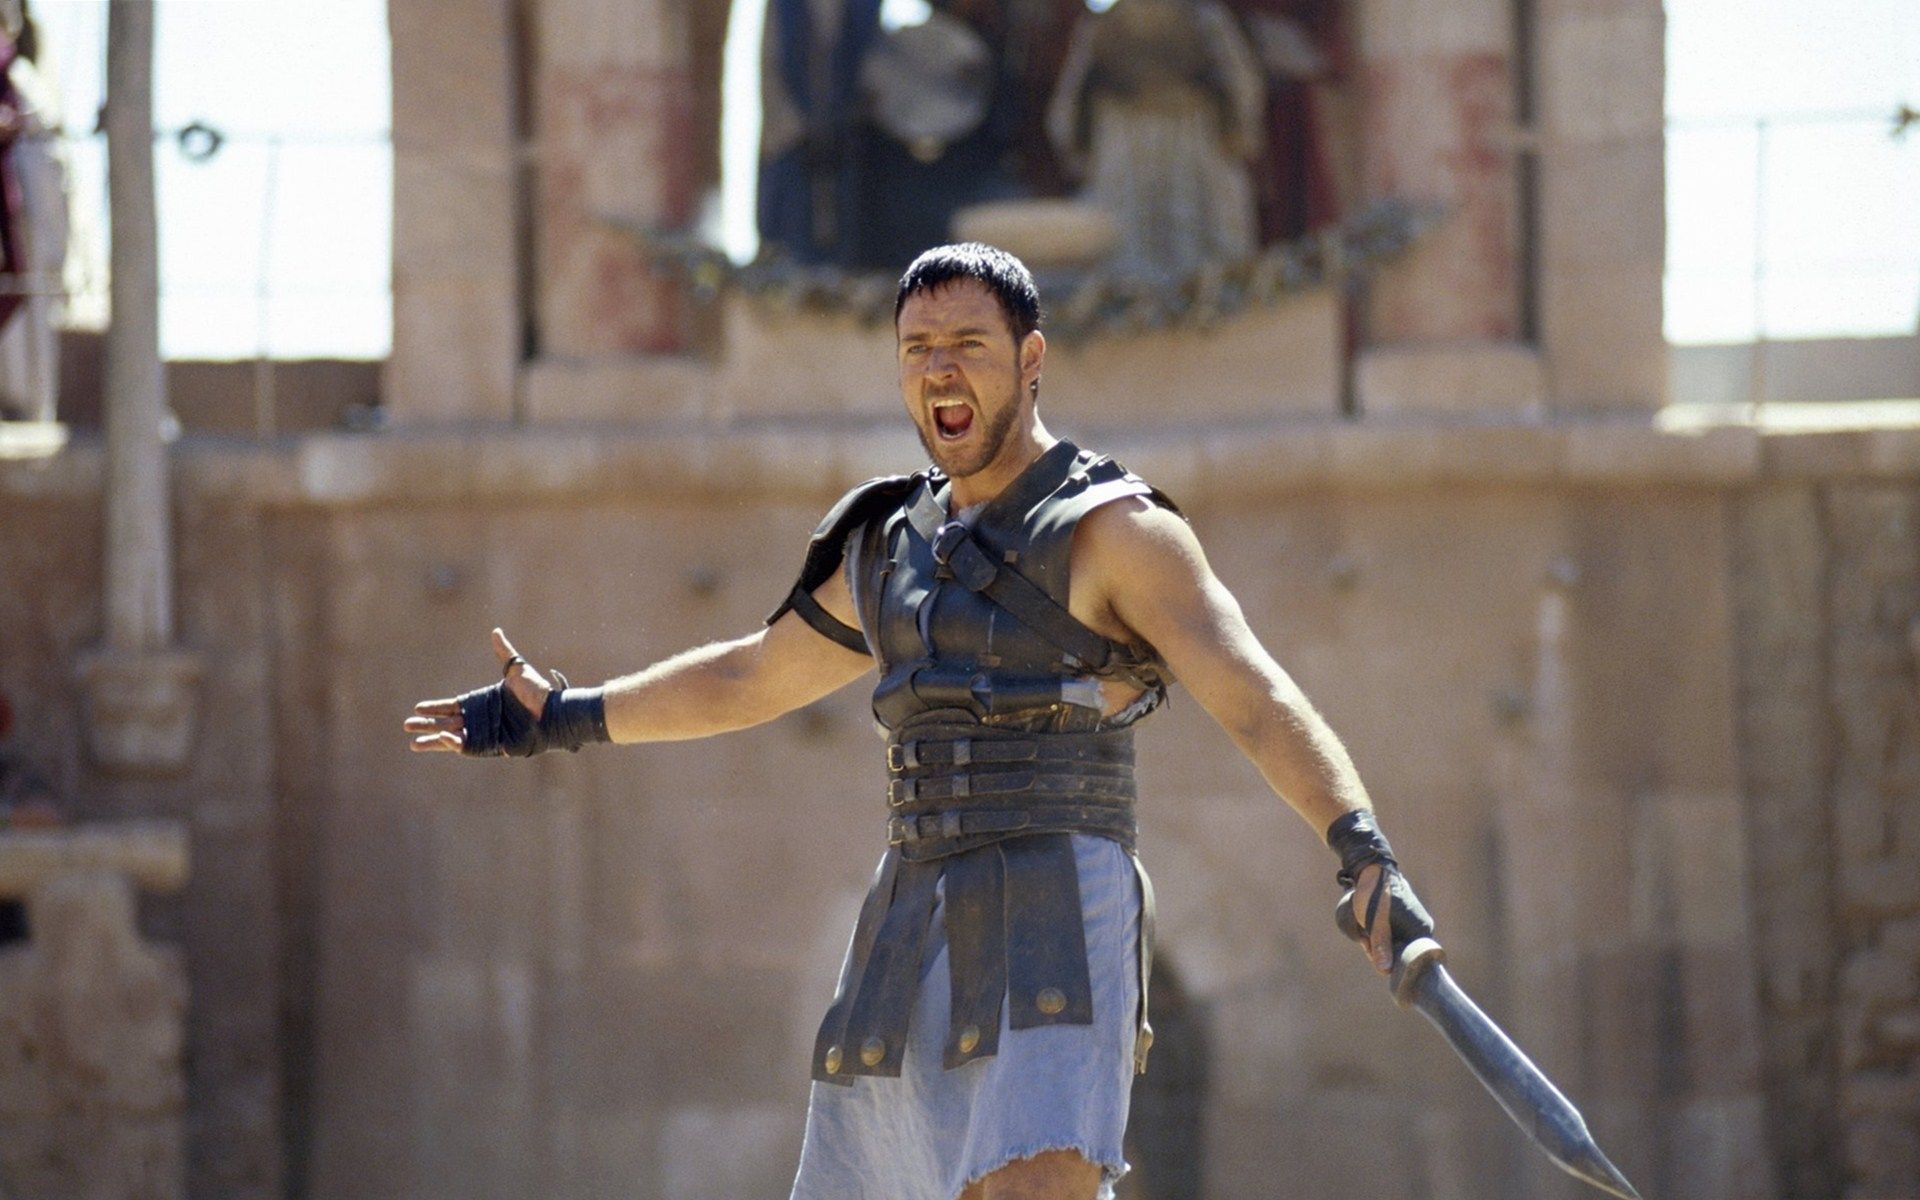 Gladiator Movie HD Wallpaper, Gladiator Pictures, New Backgrounds